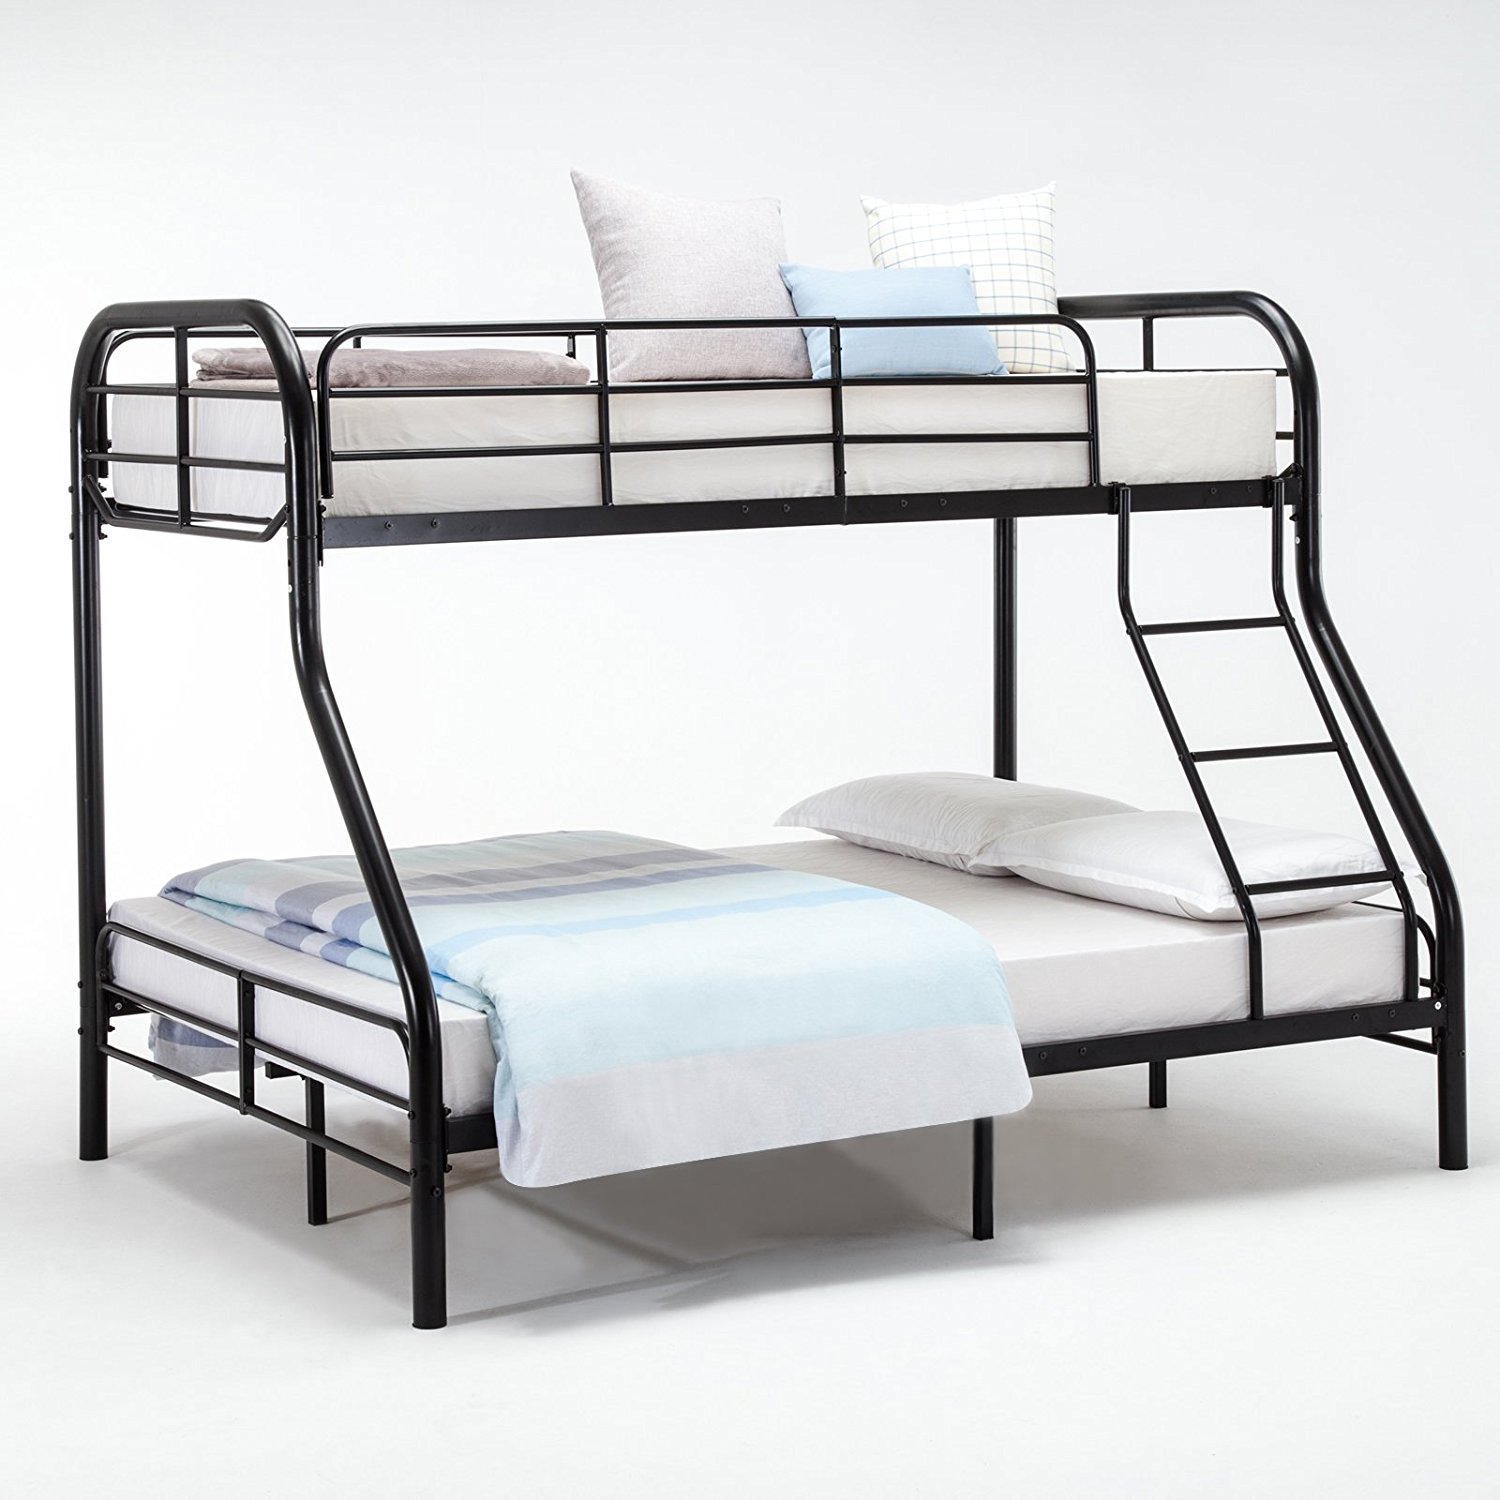 Tips And Reasons In Choosing Full Over Full Bunk Beds For Adults